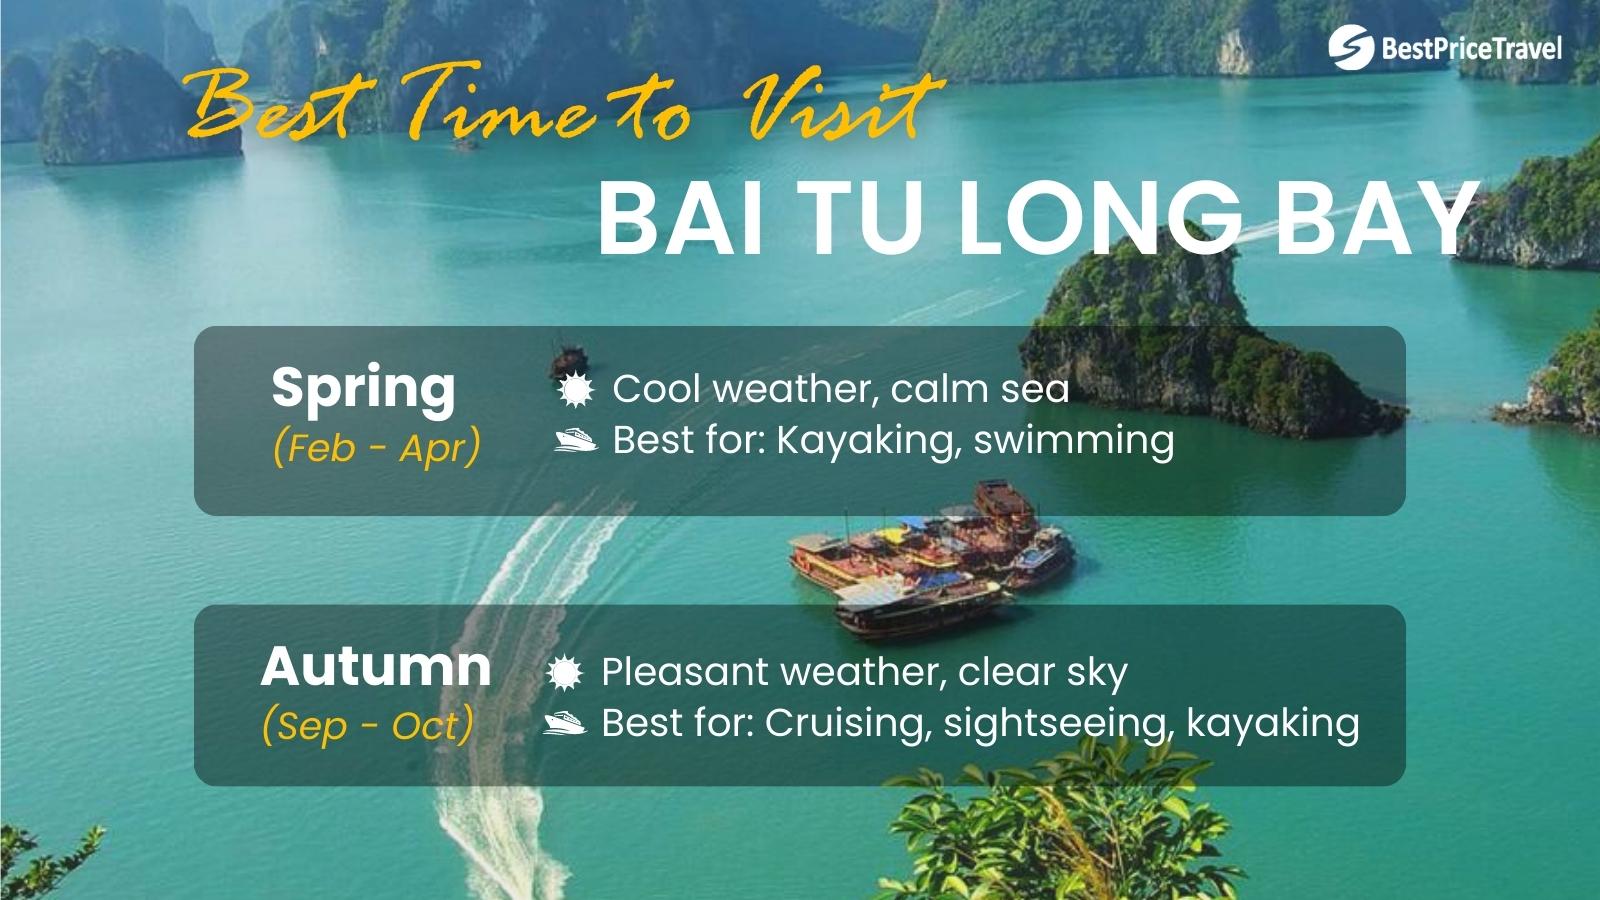 The best time to visit Bai Tu Long Bay